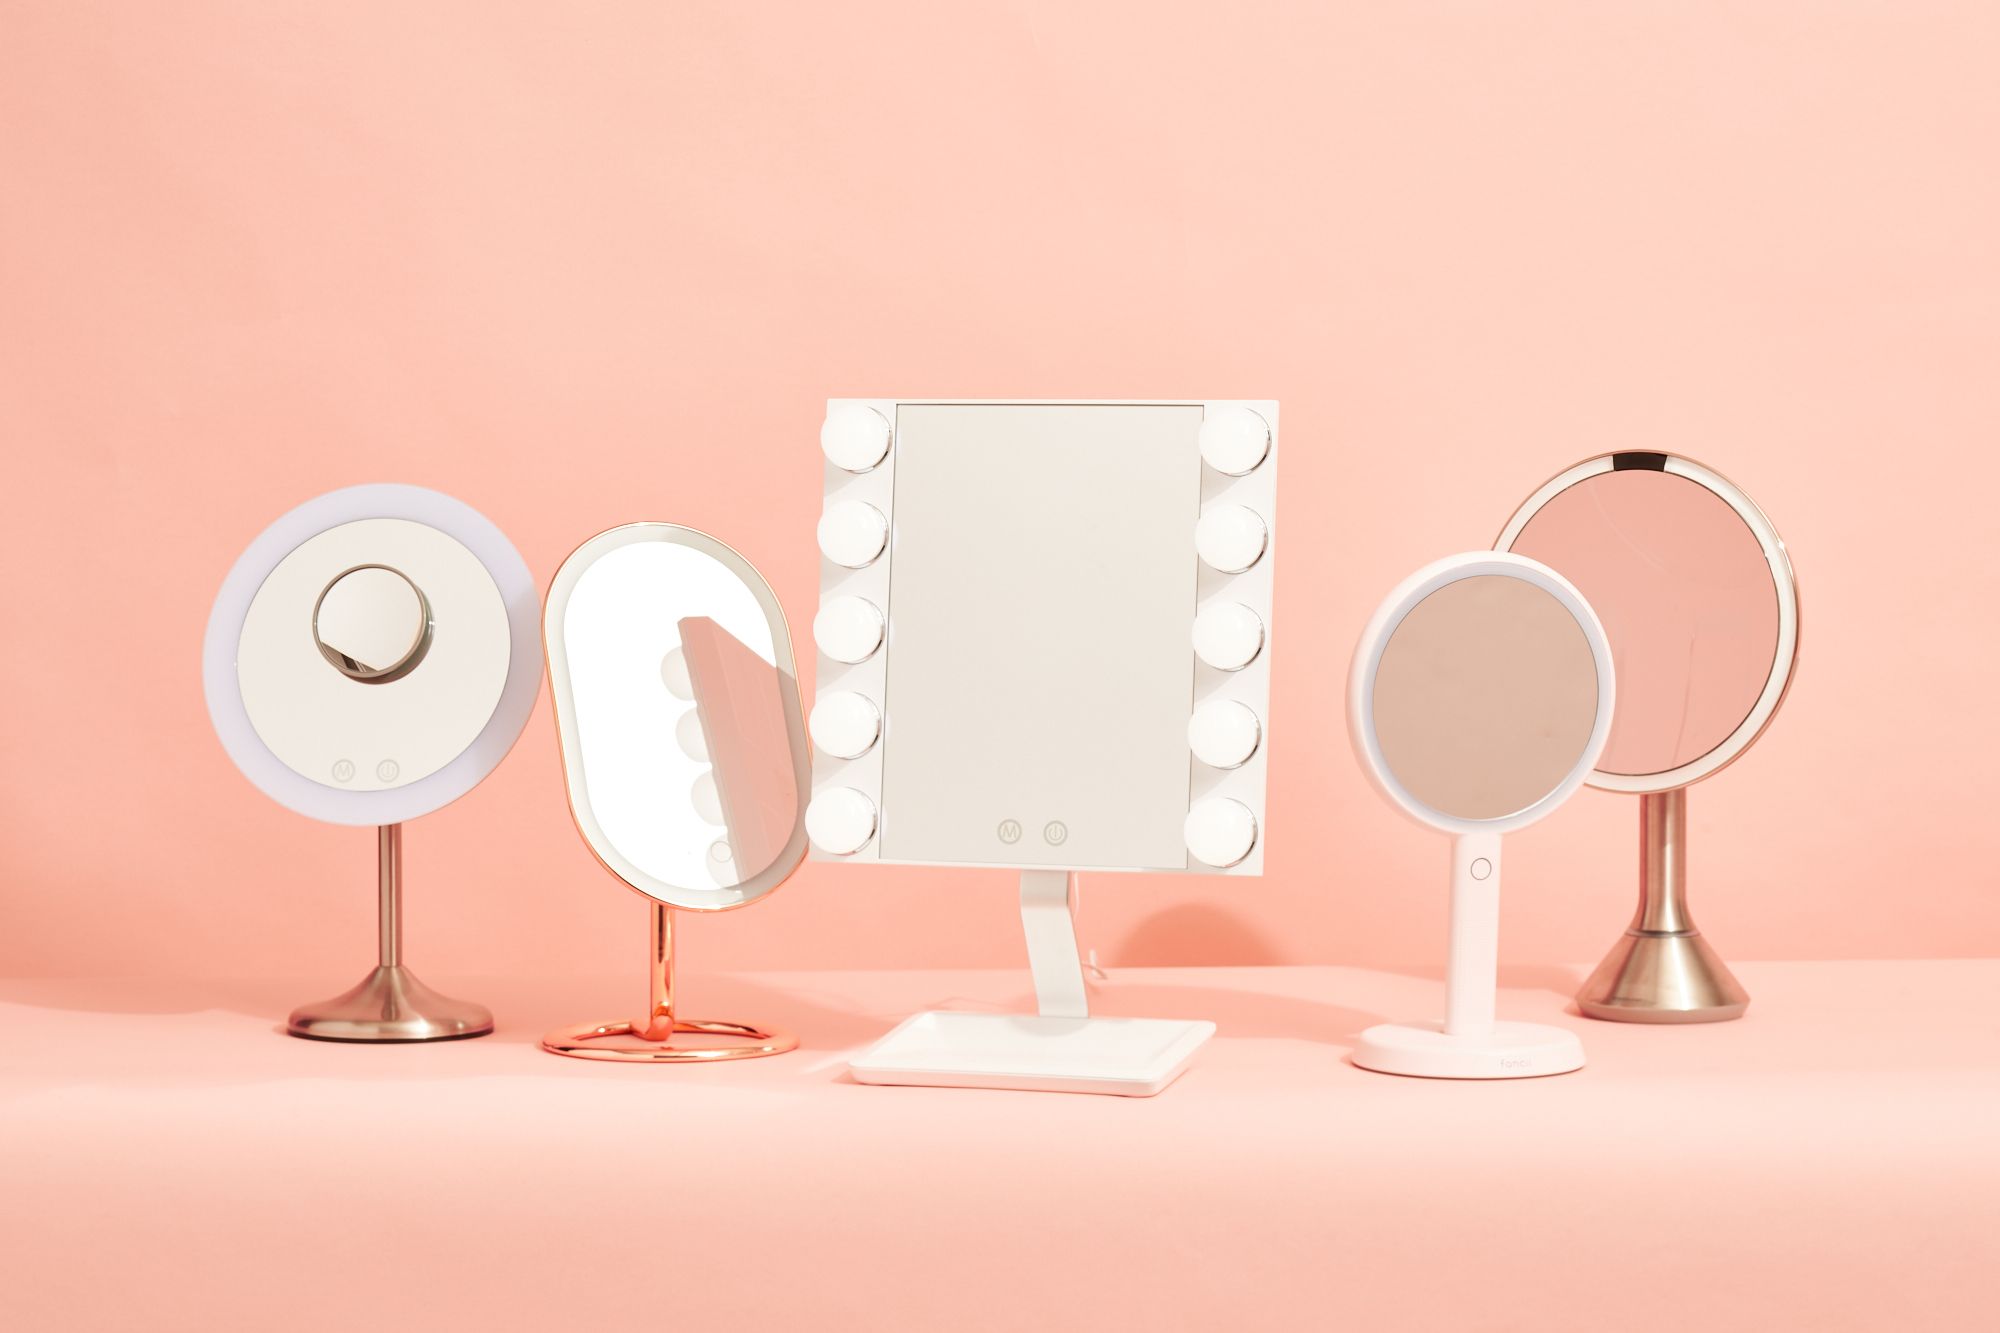 Do Fancii mirrors actually make a difference in your beauty routine?